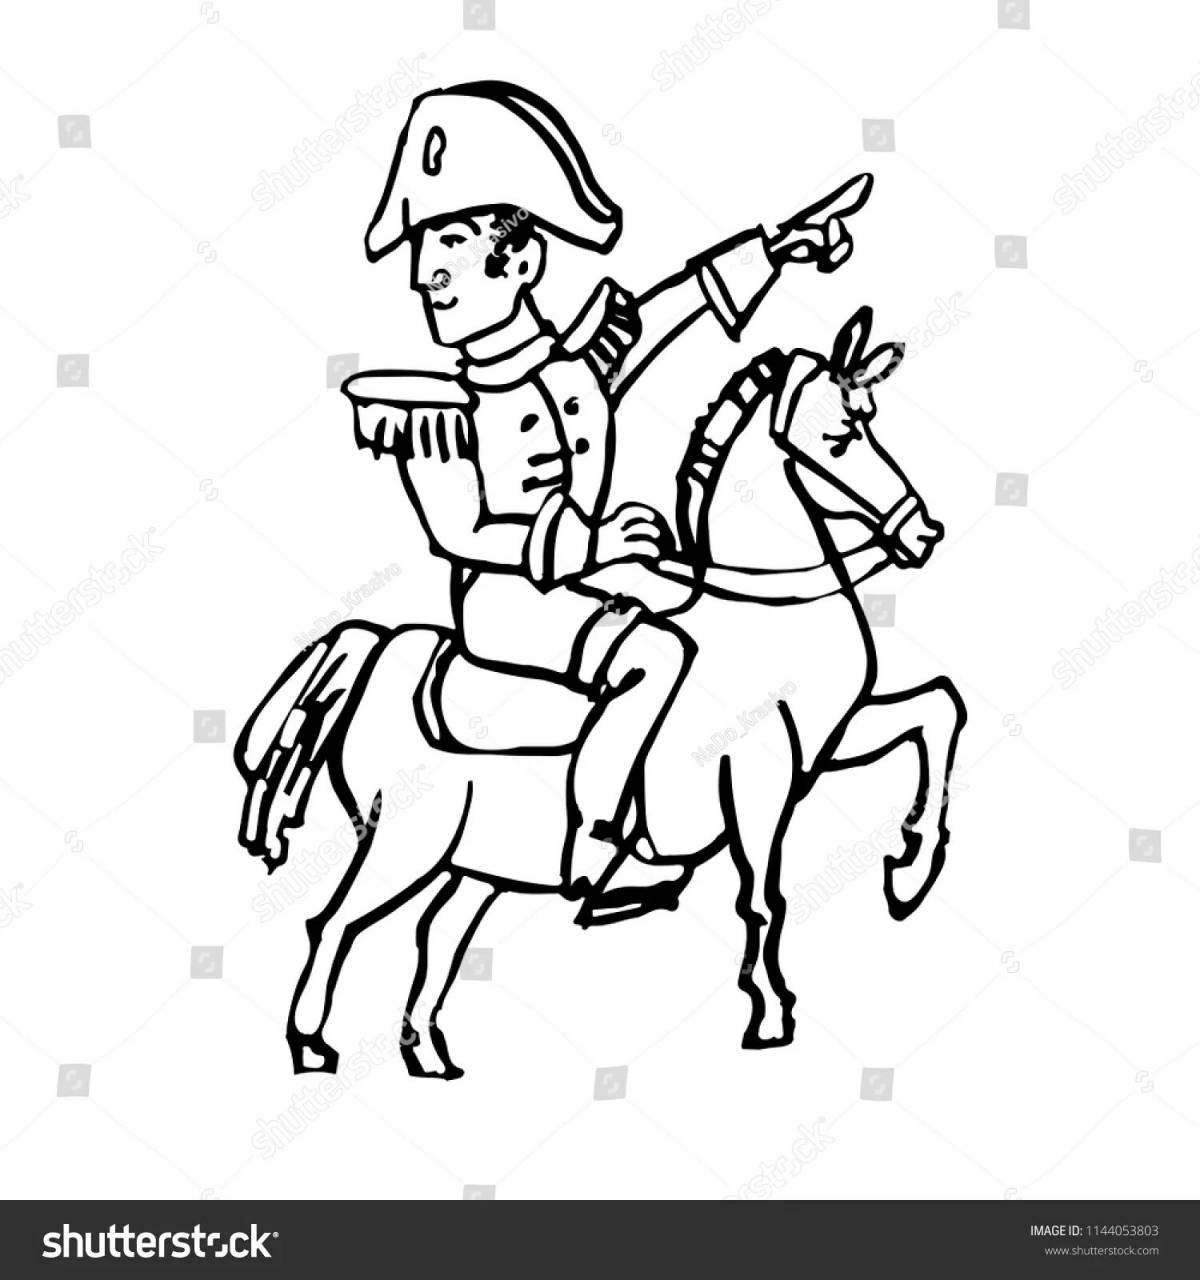 Playful napoleon coloring page